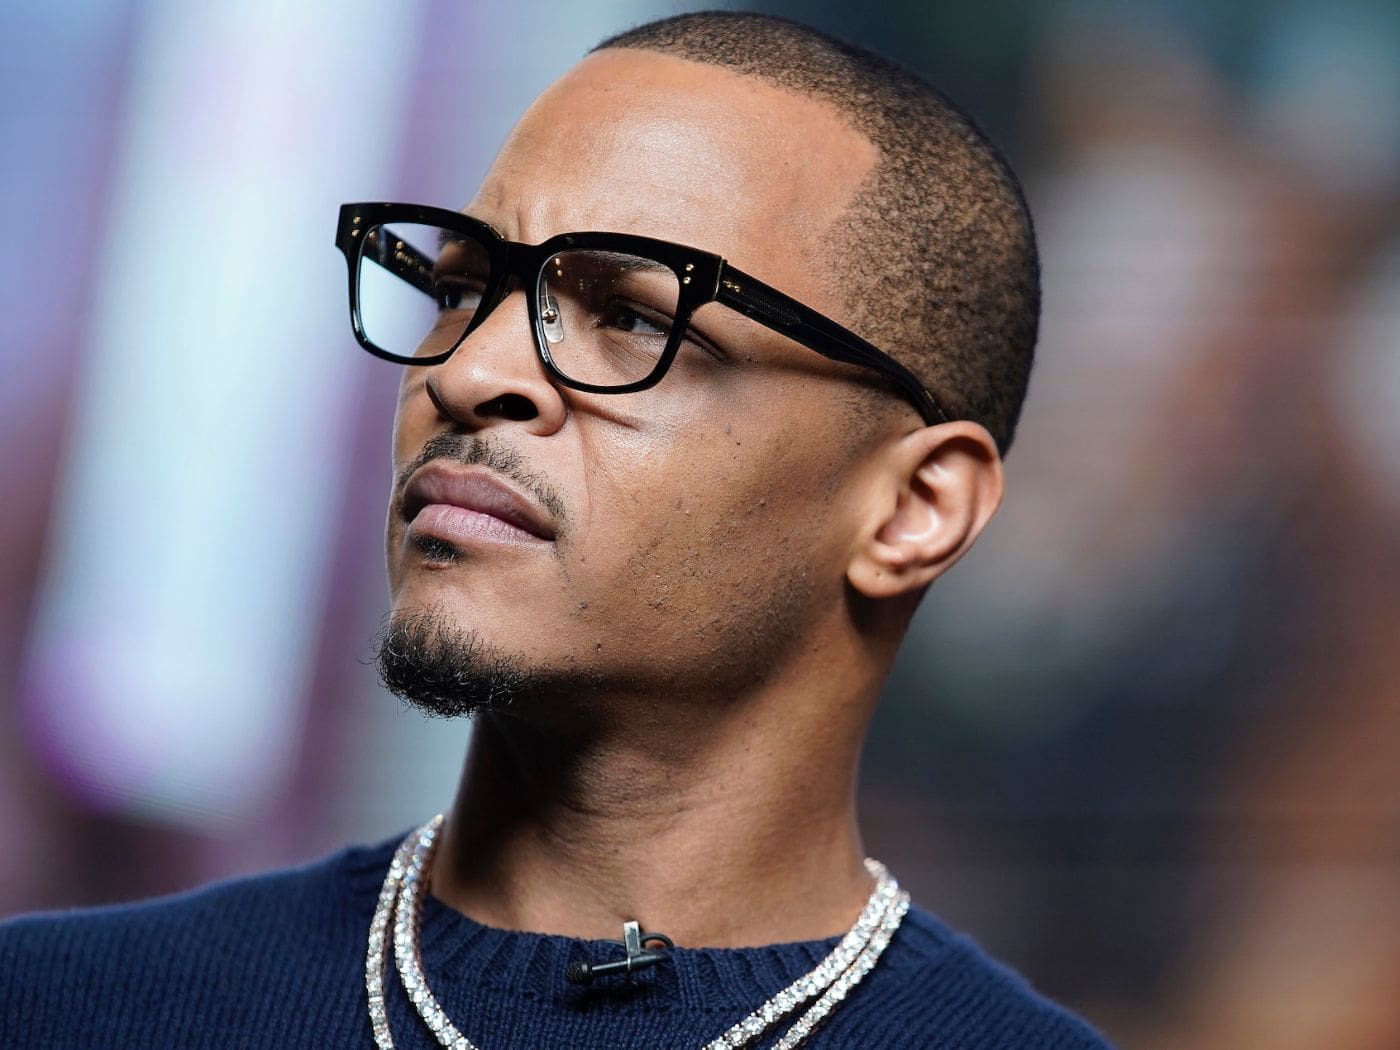 T.I. Brings Tears In His Fans' Eyes With This Video